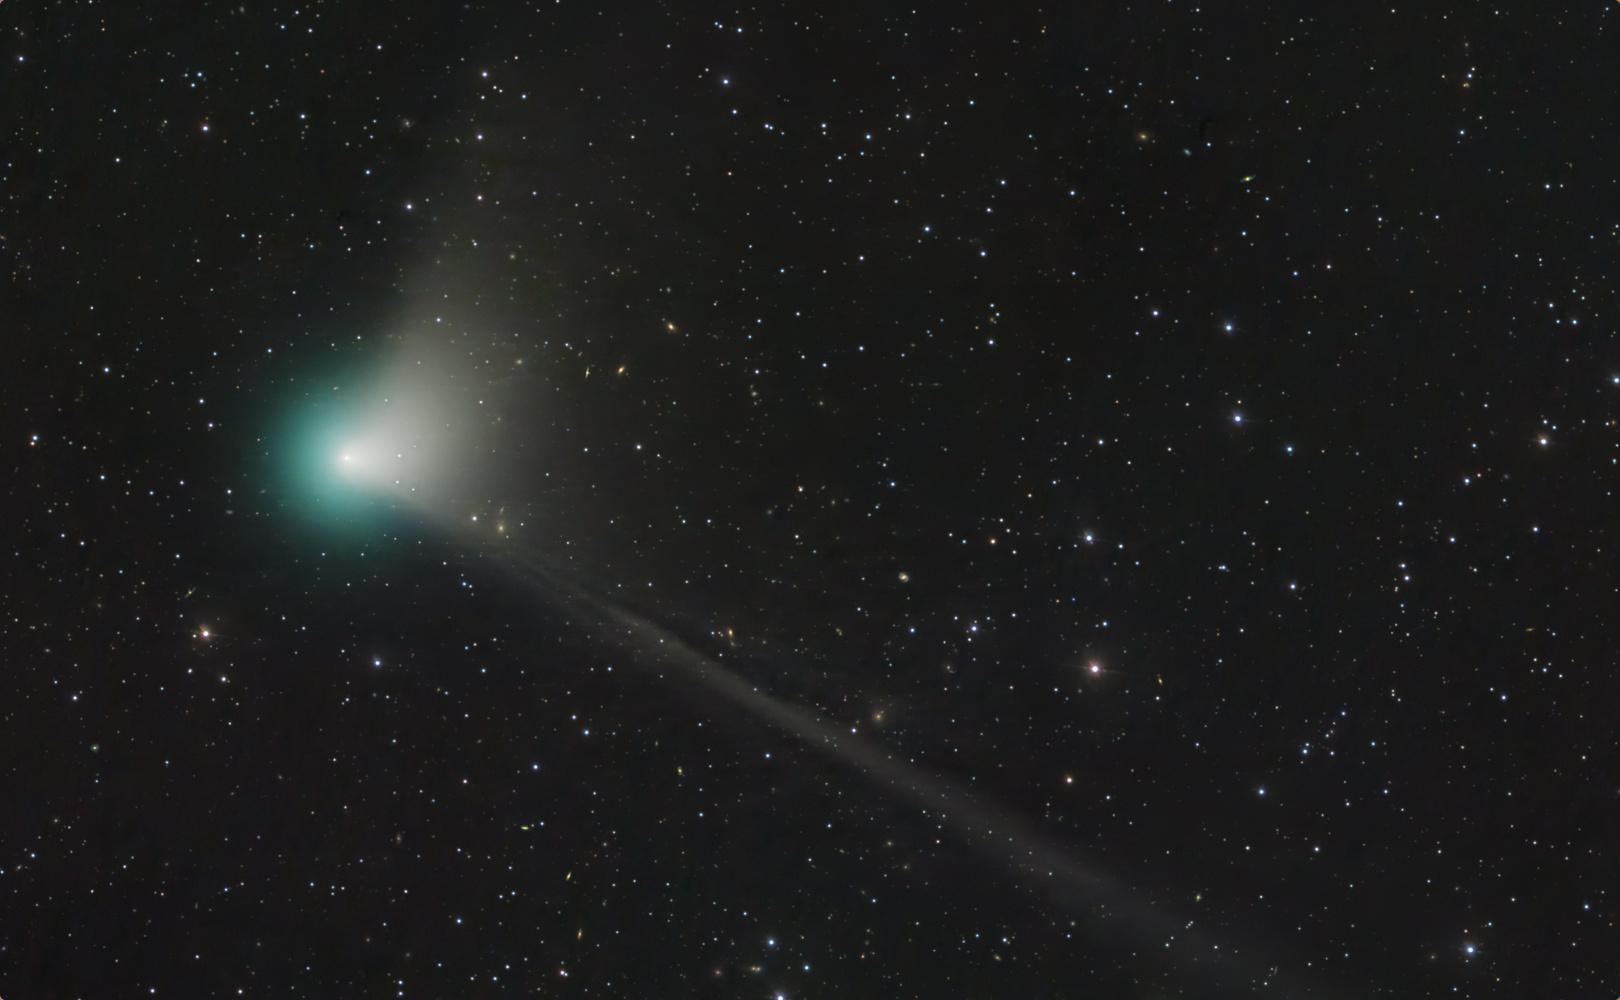 Perhaps we will see the first comet of 2020 with the naked eye